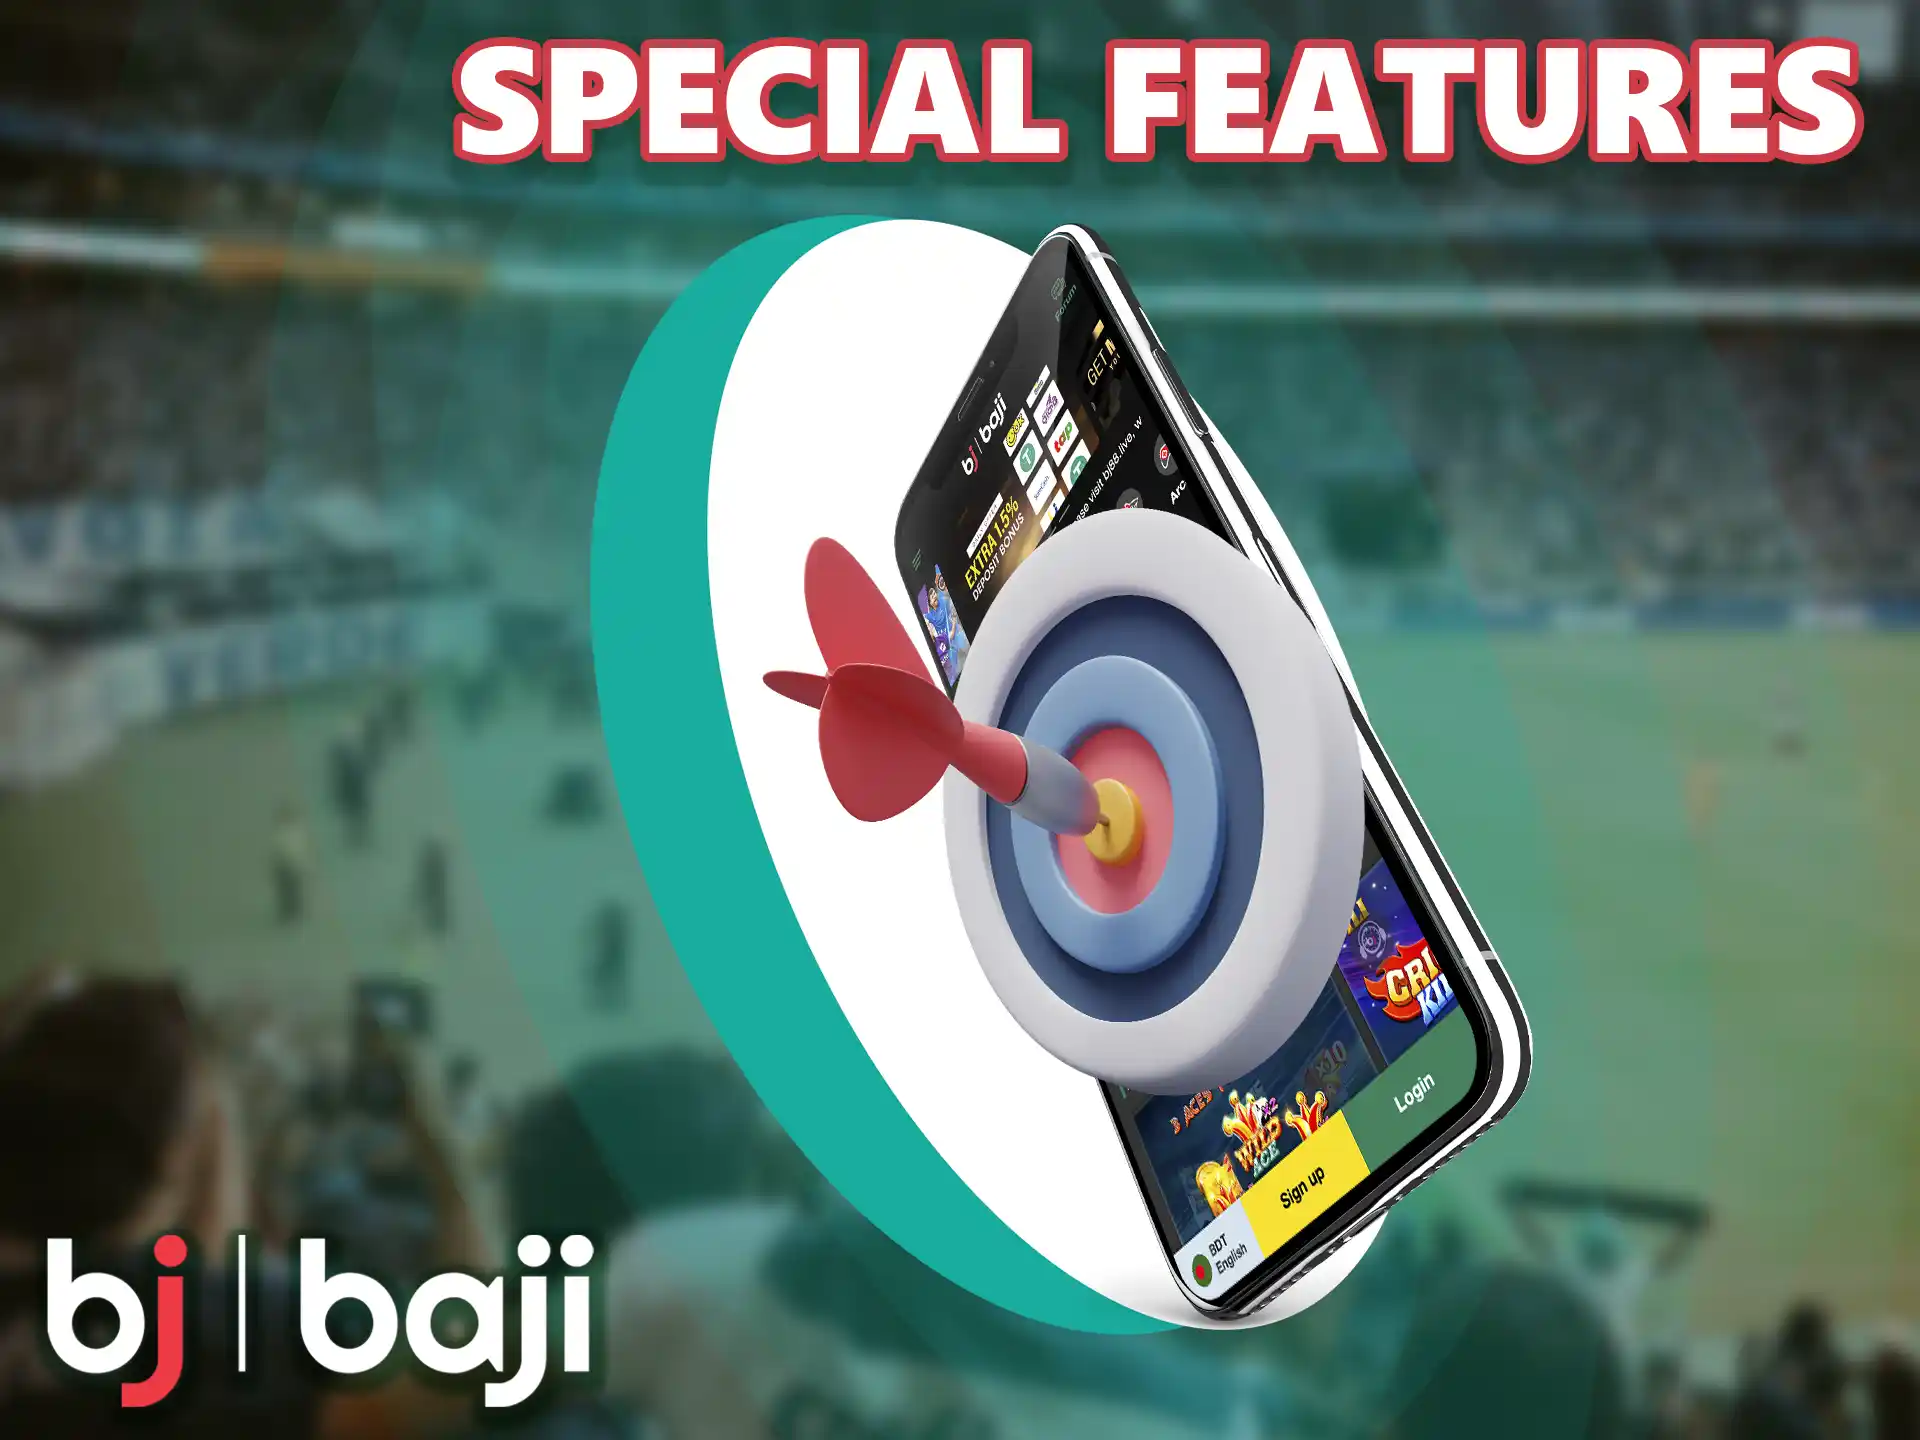 Find out what additional functions are available to Bengladeshi players on the Baji app.